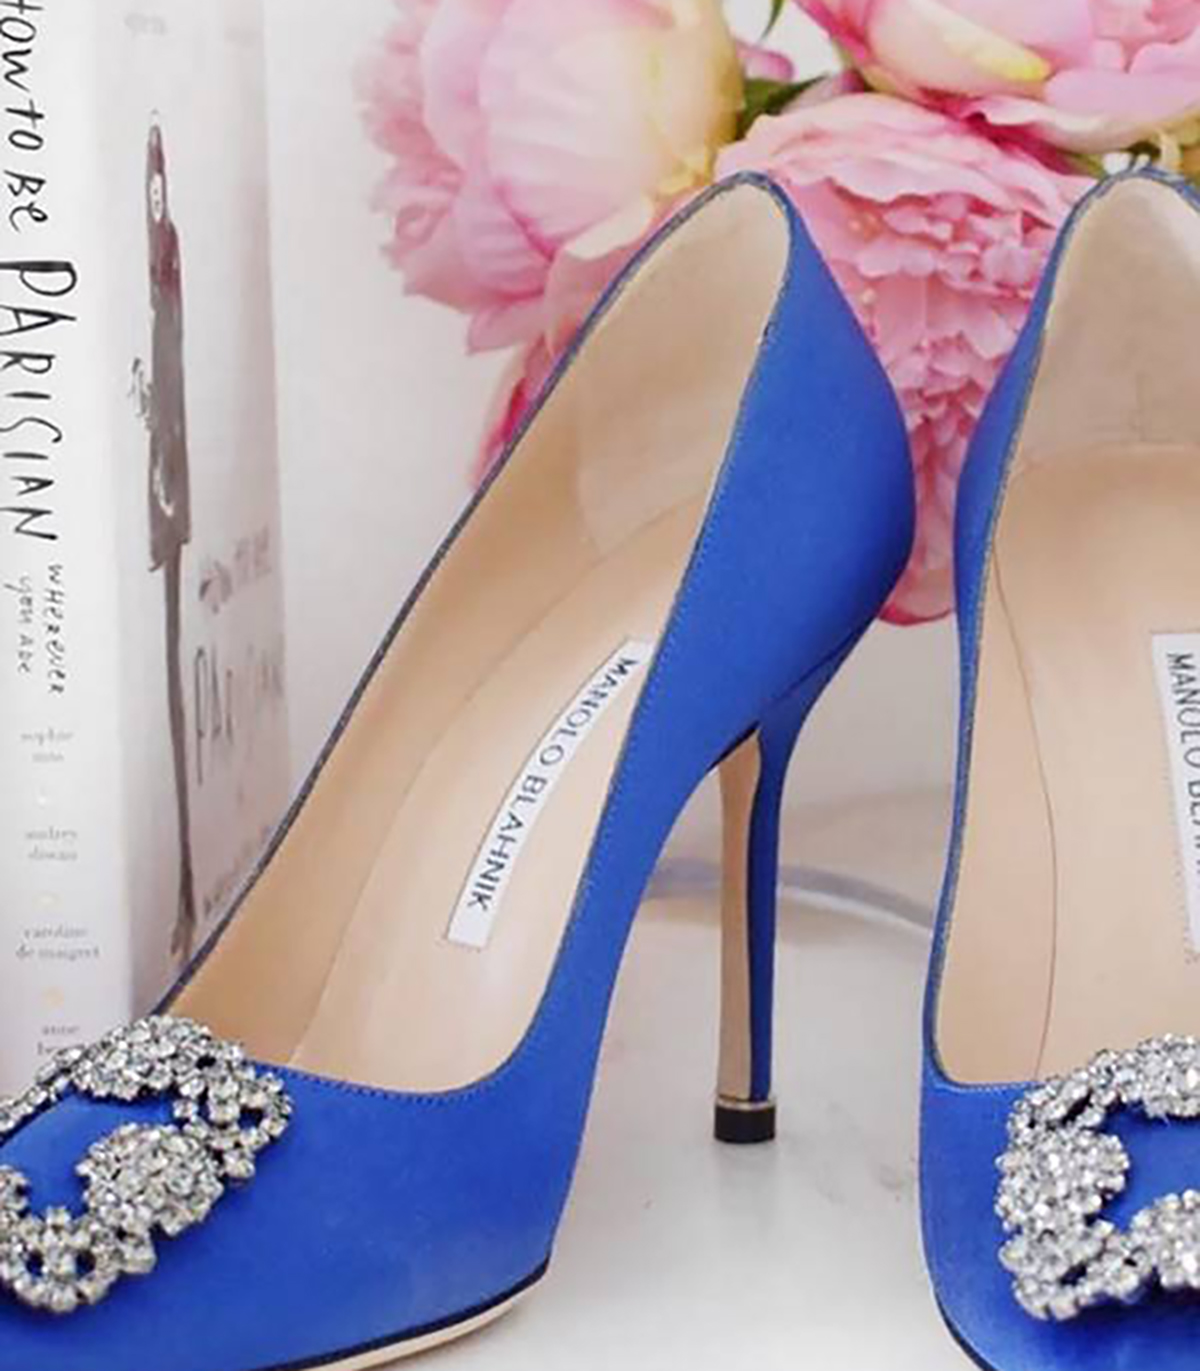 My Manolo Blahnik Hangisi Pumps - The Reluctant Blogger